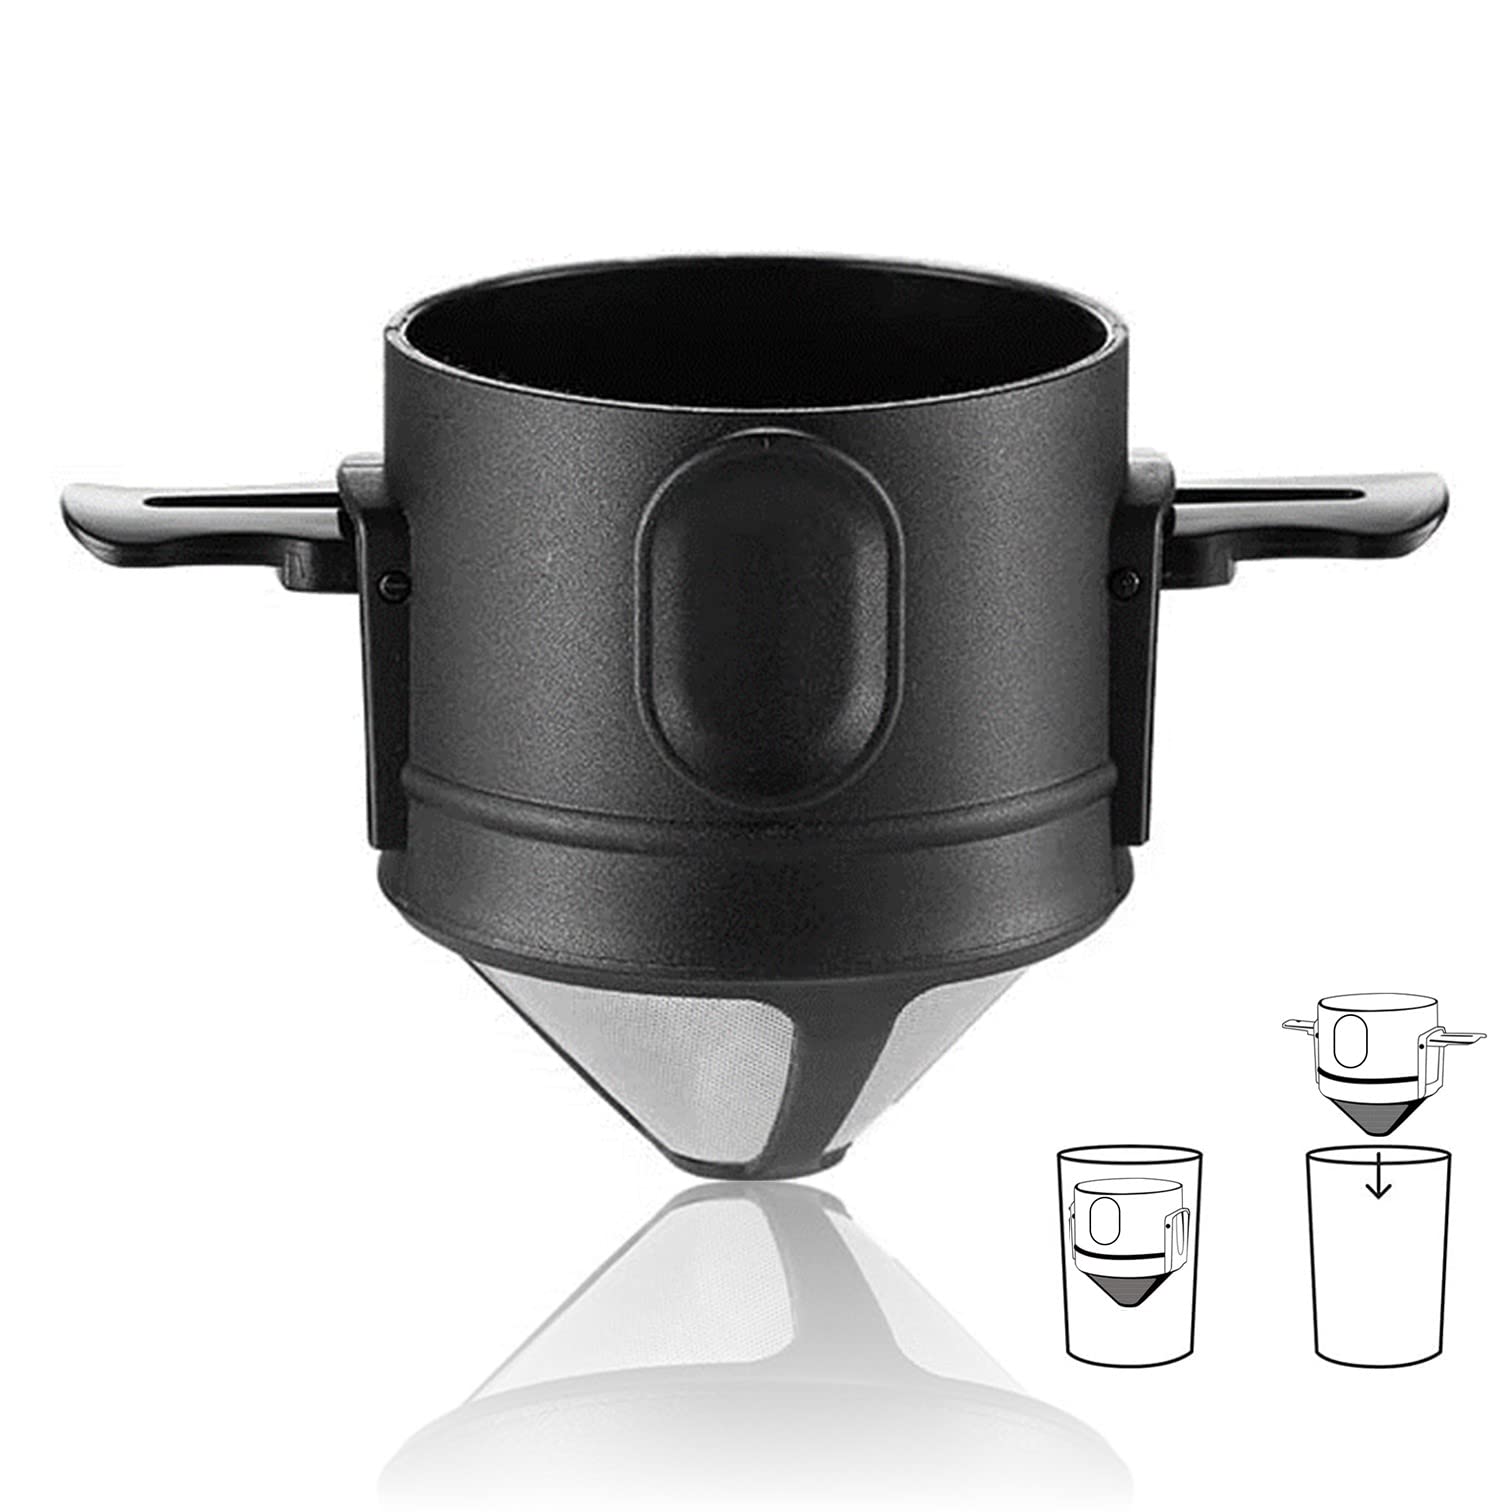 Verilux Filter Coffee Maker Double Mesh Pour Over Coffee Filter Food Grade Stainless Steel & Plastic Coffee Dripper 100% Paperless Maker Foldable to Fit Most Cup Keep Coffee Flavour Easy to Use and Clean